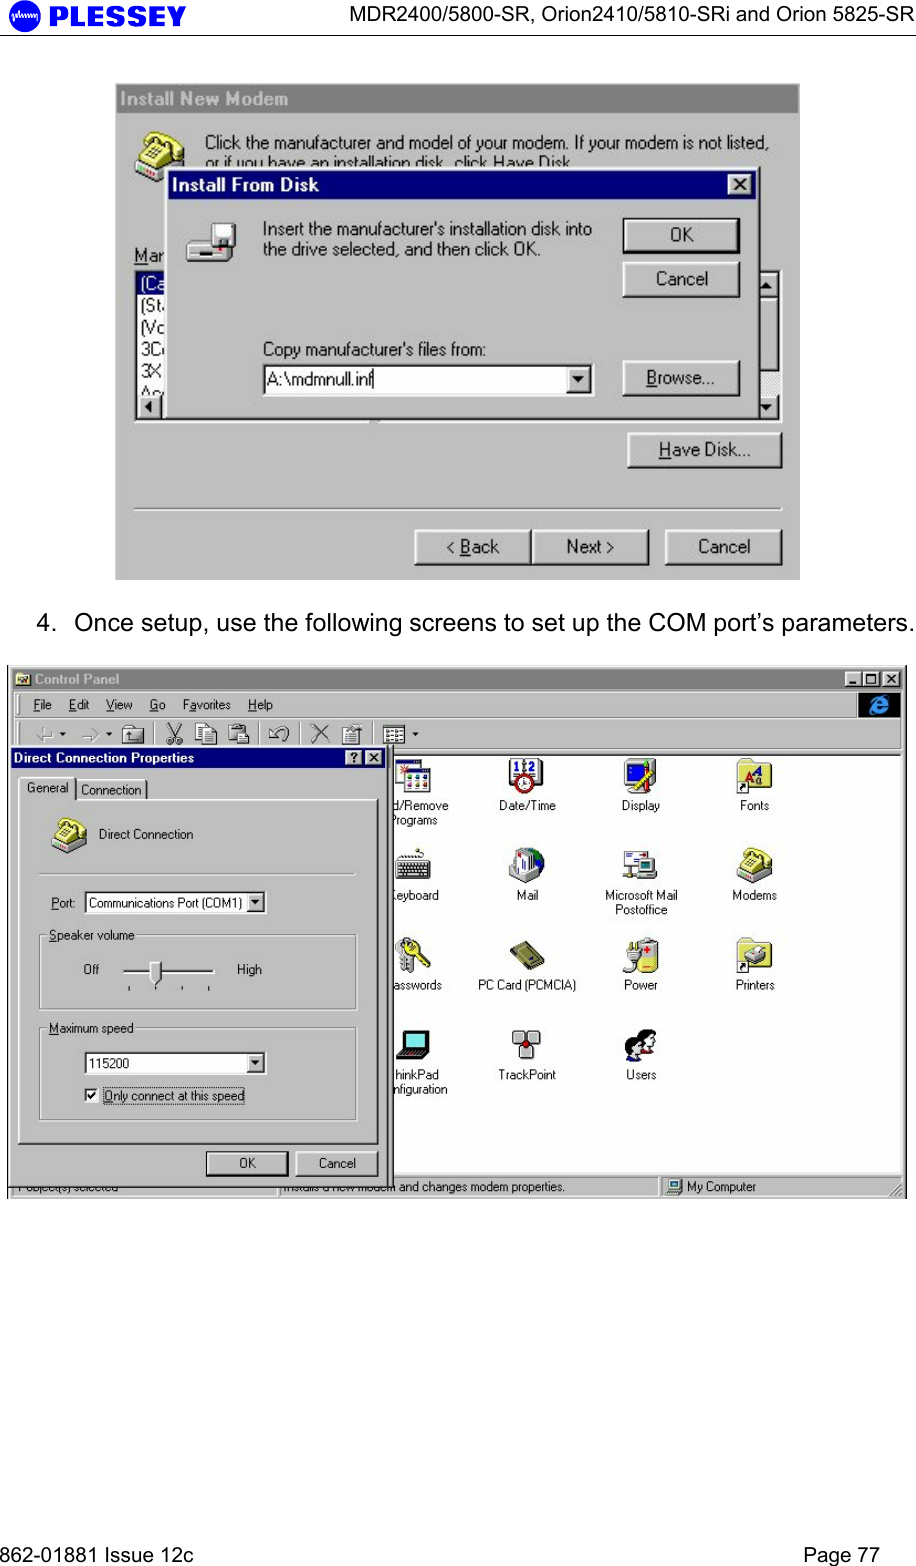      MDR2400/5800-SR, Orion2410/5810-SRi and Orion 5825-SR   862-01881 Issue 12c    Page 77   4.  Once setup, use the following screens to set up the COM port’s parameters.    